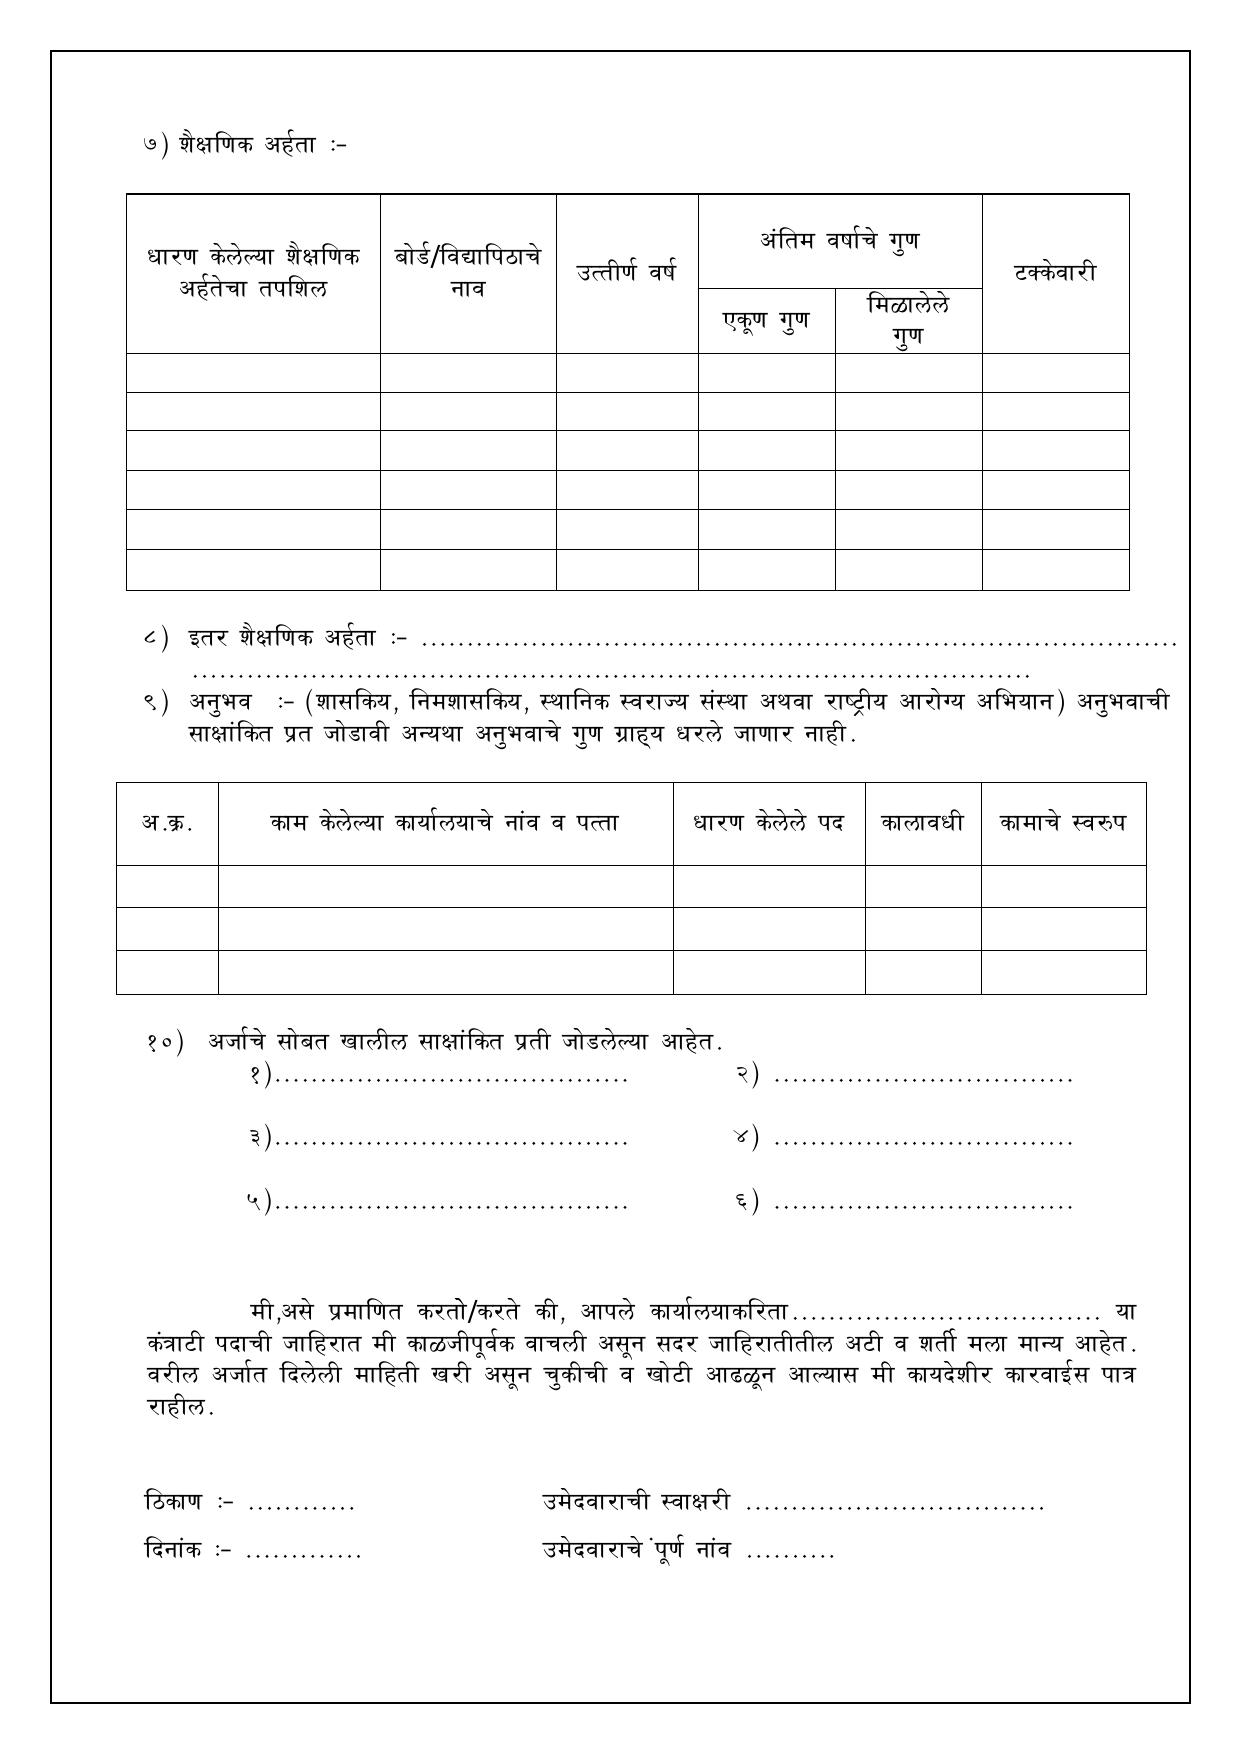 Nagpur Municipal Corporation (NMC) Full Time Medical Officer Recruitment 2023 - Page 6